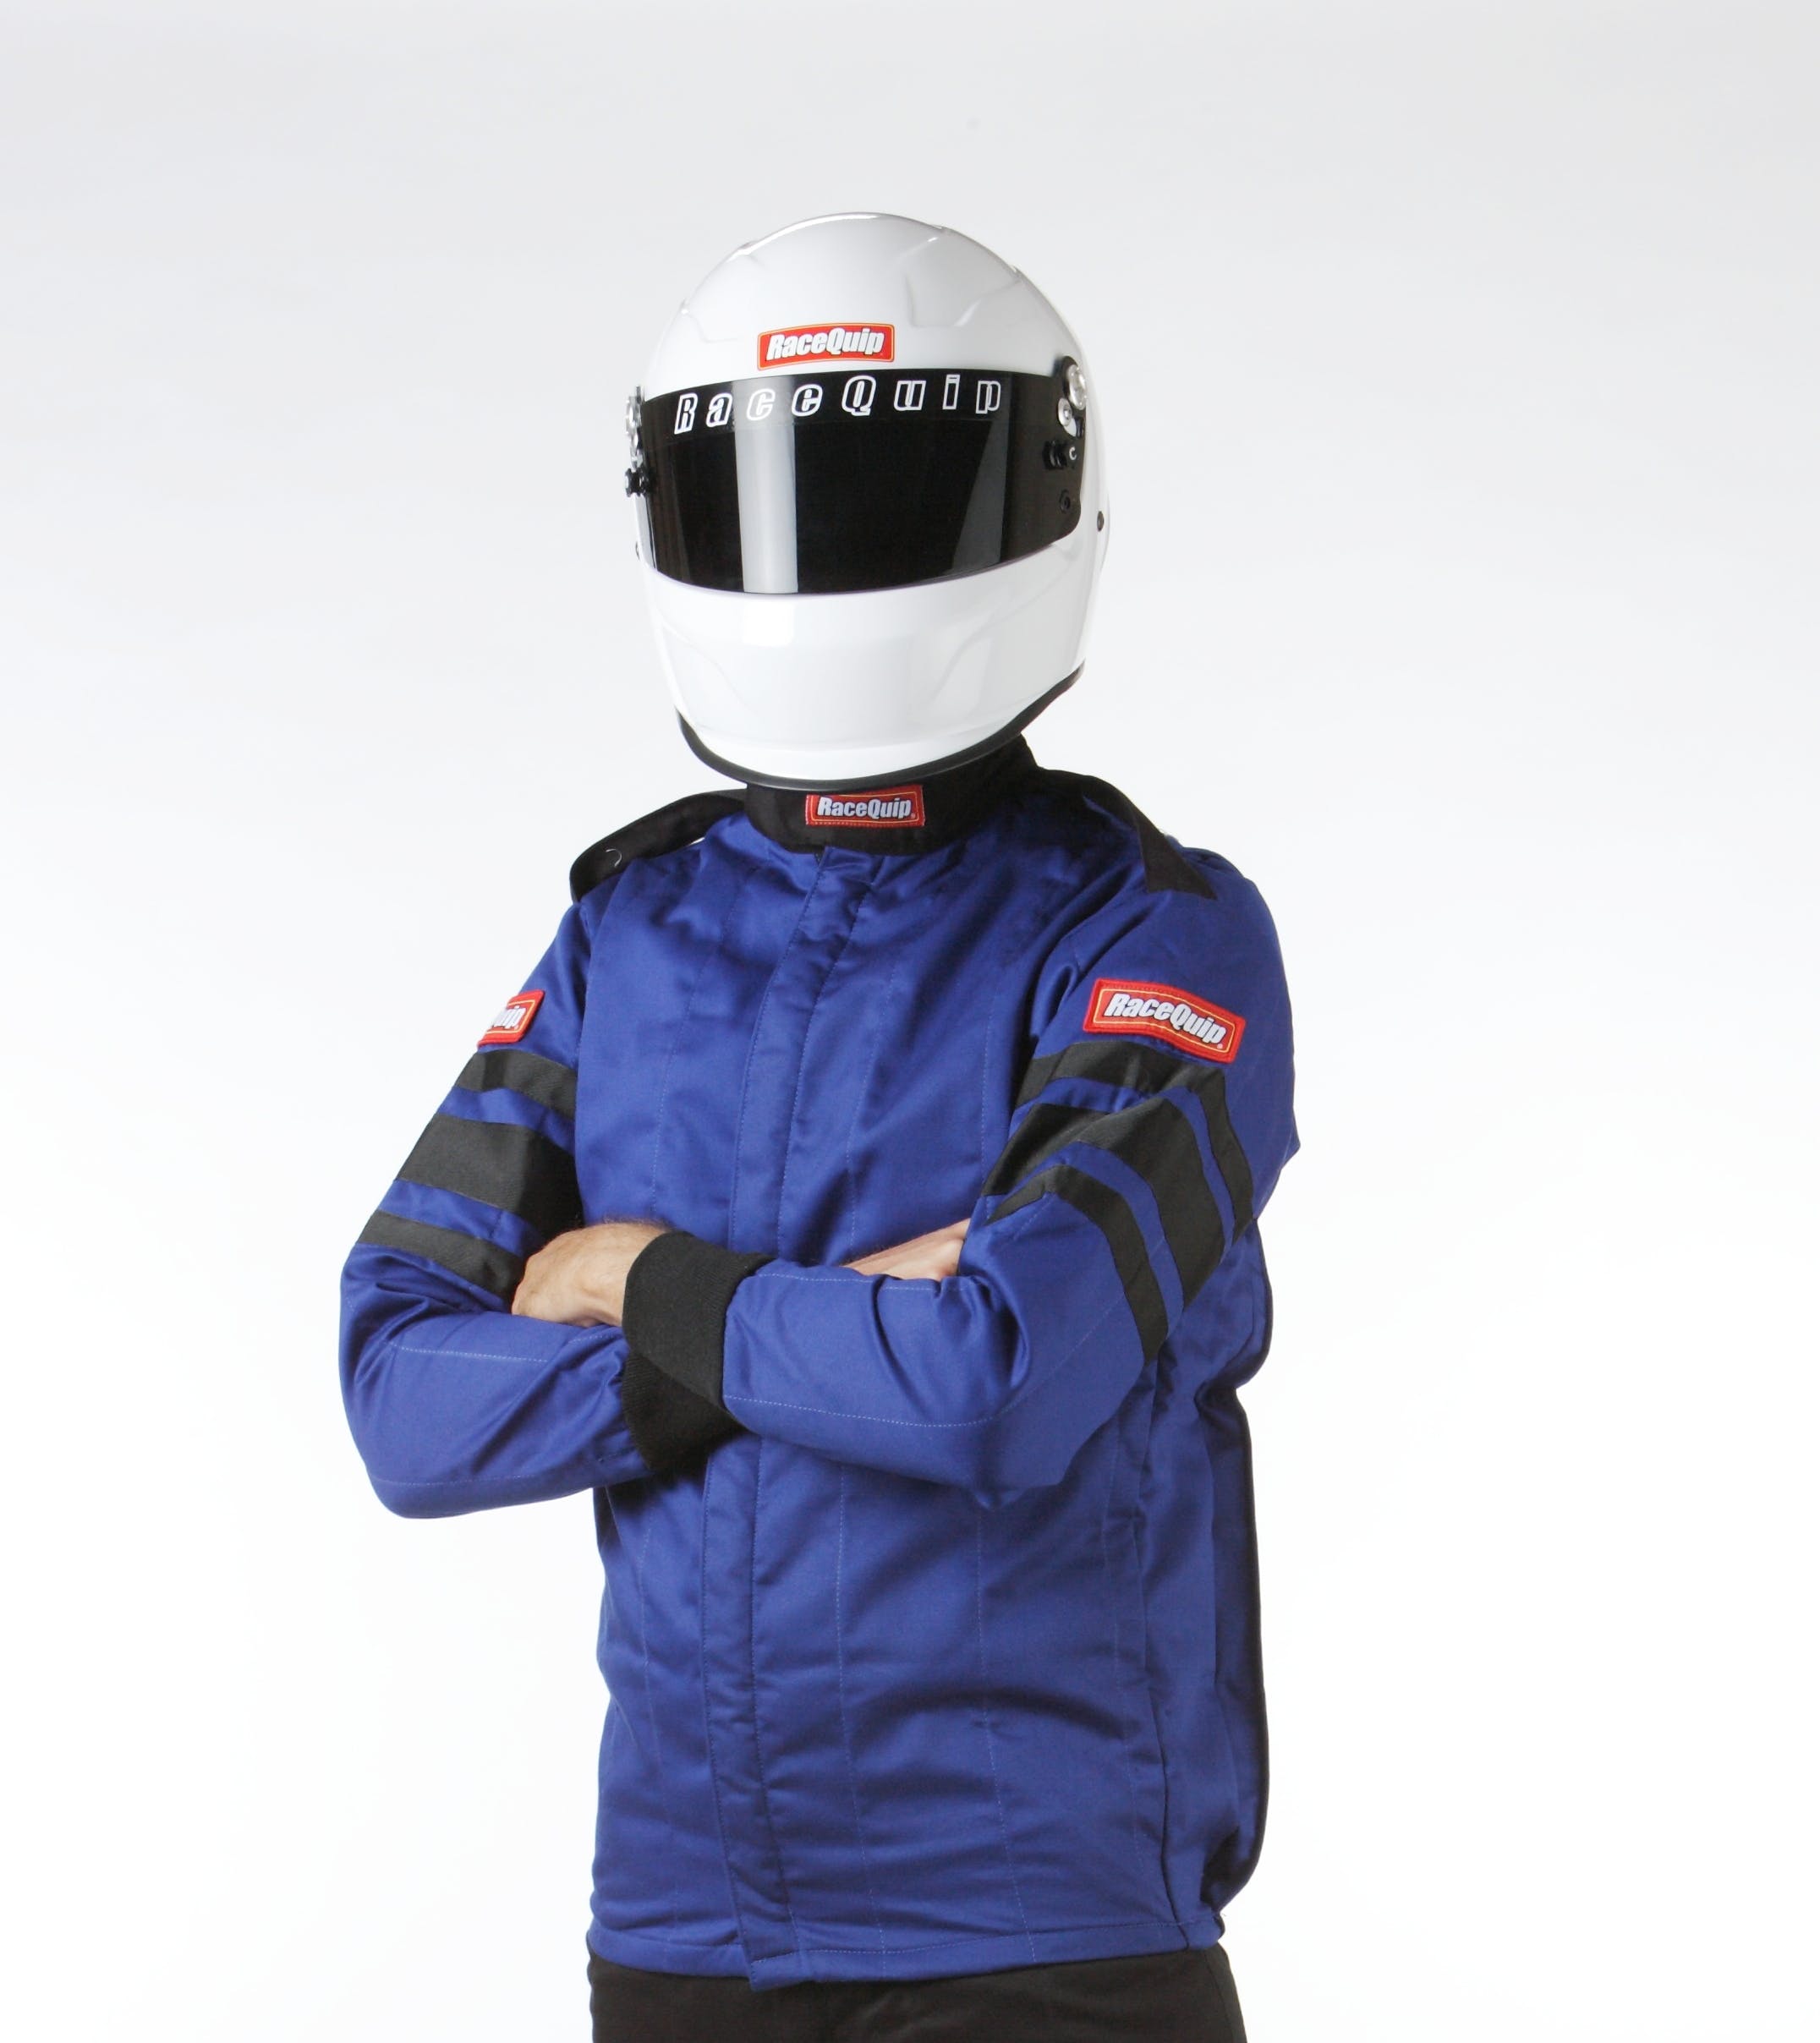 RaceQuip 121026 SFI-5 Pyrovatex Multi-Layer Racing Fire Jacket (Blue, X-Large)